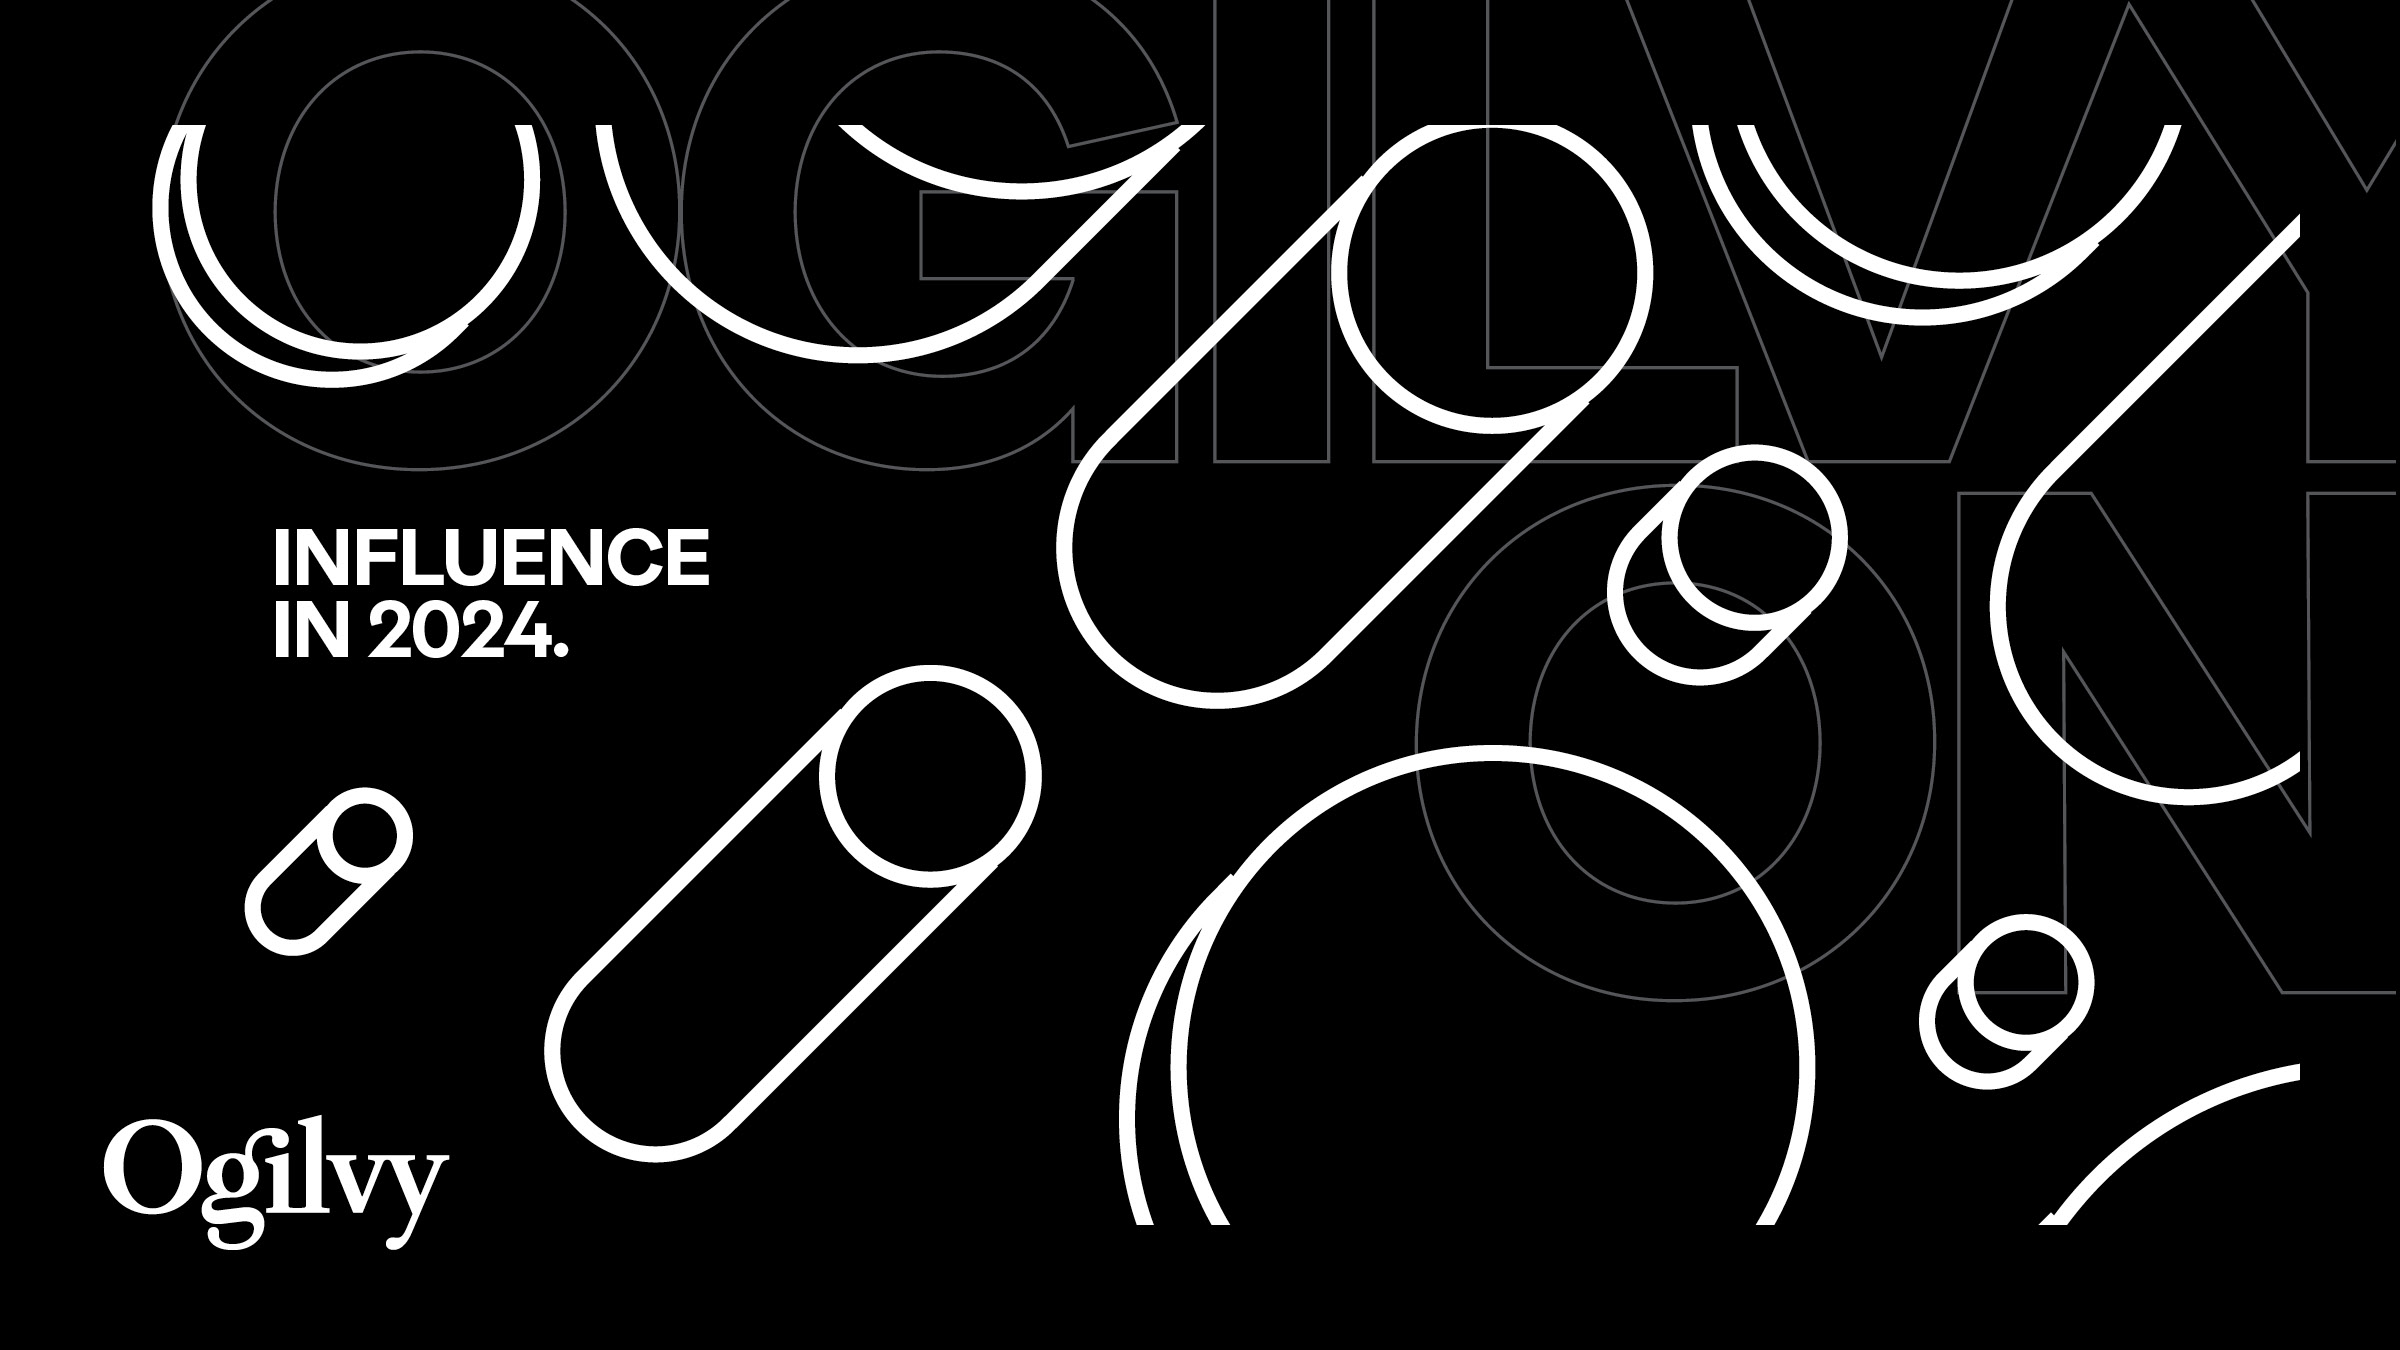 Ogilvy On—2024 Influence Trends You Should Care About